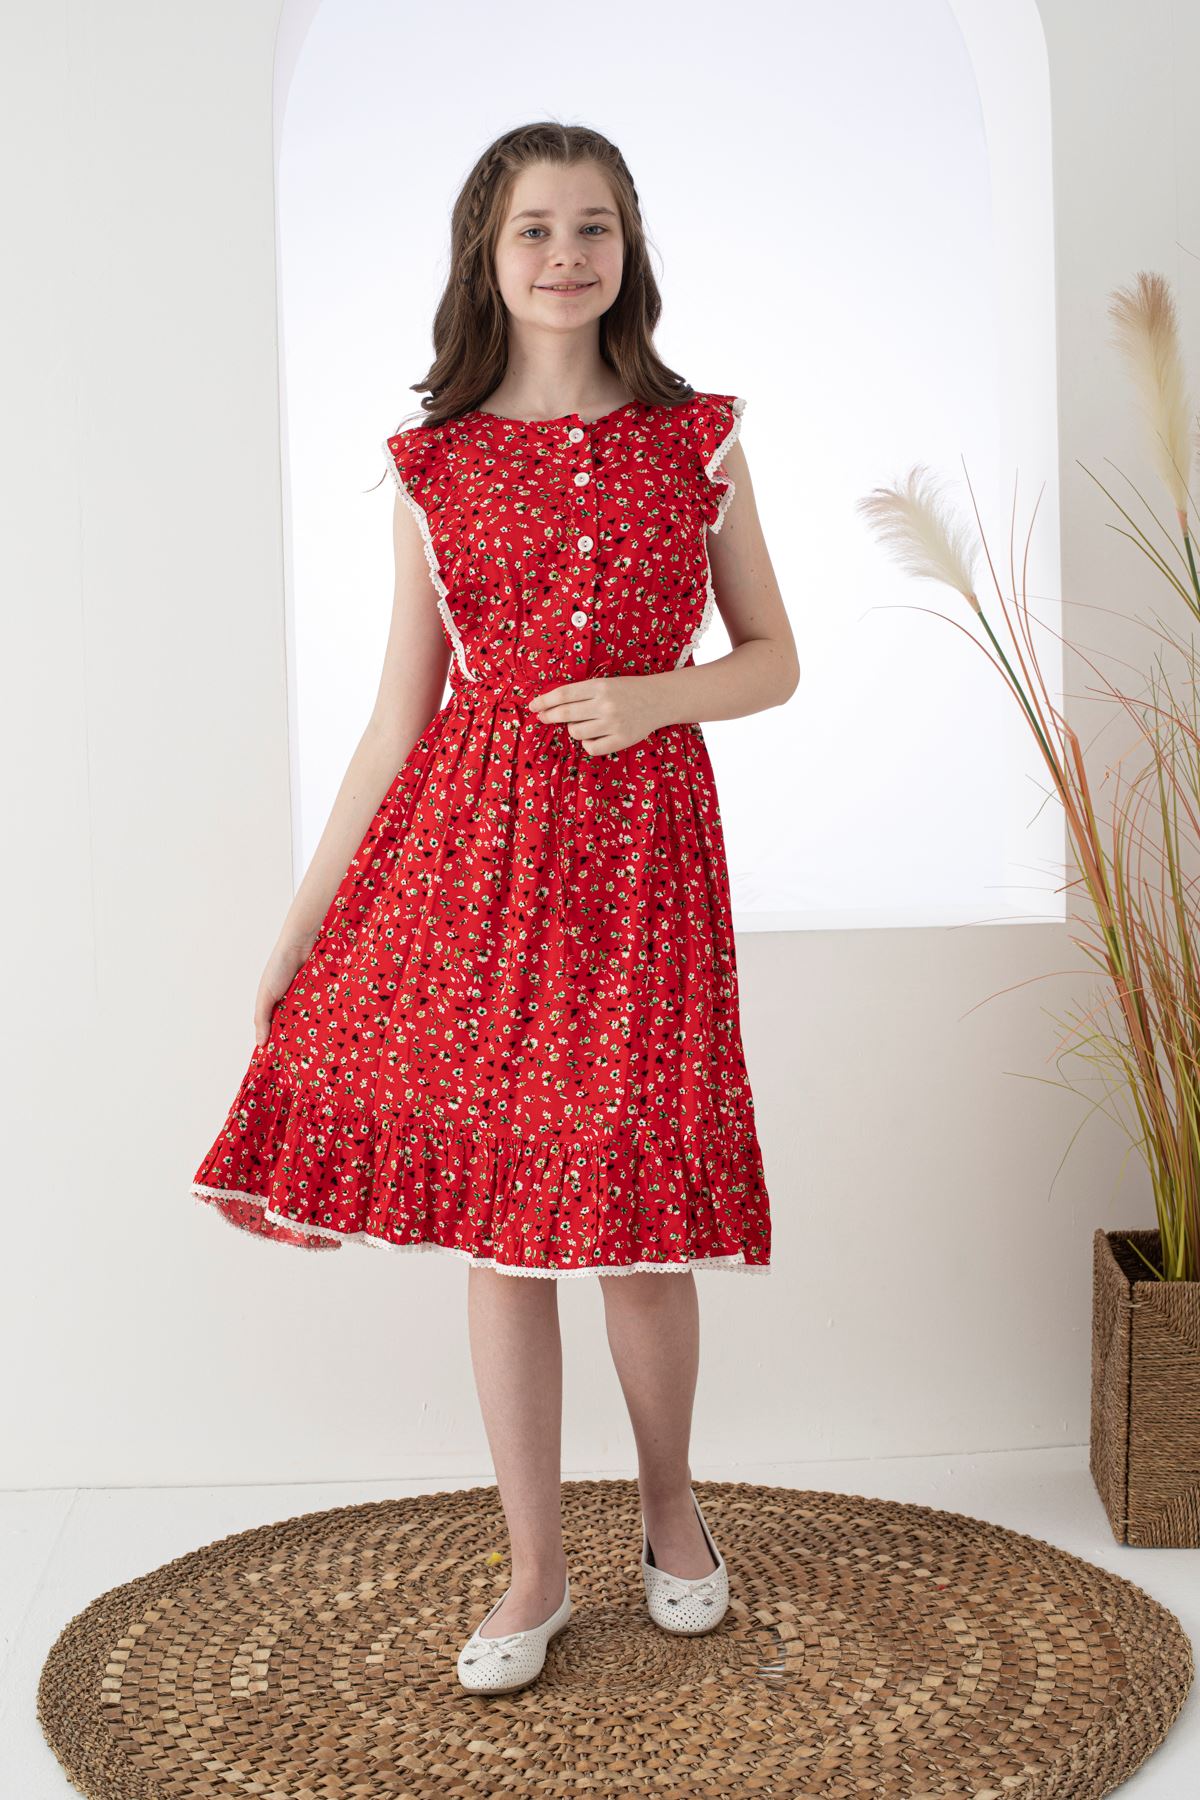 Patterned Girl's Dress with Ruffled Sleeves